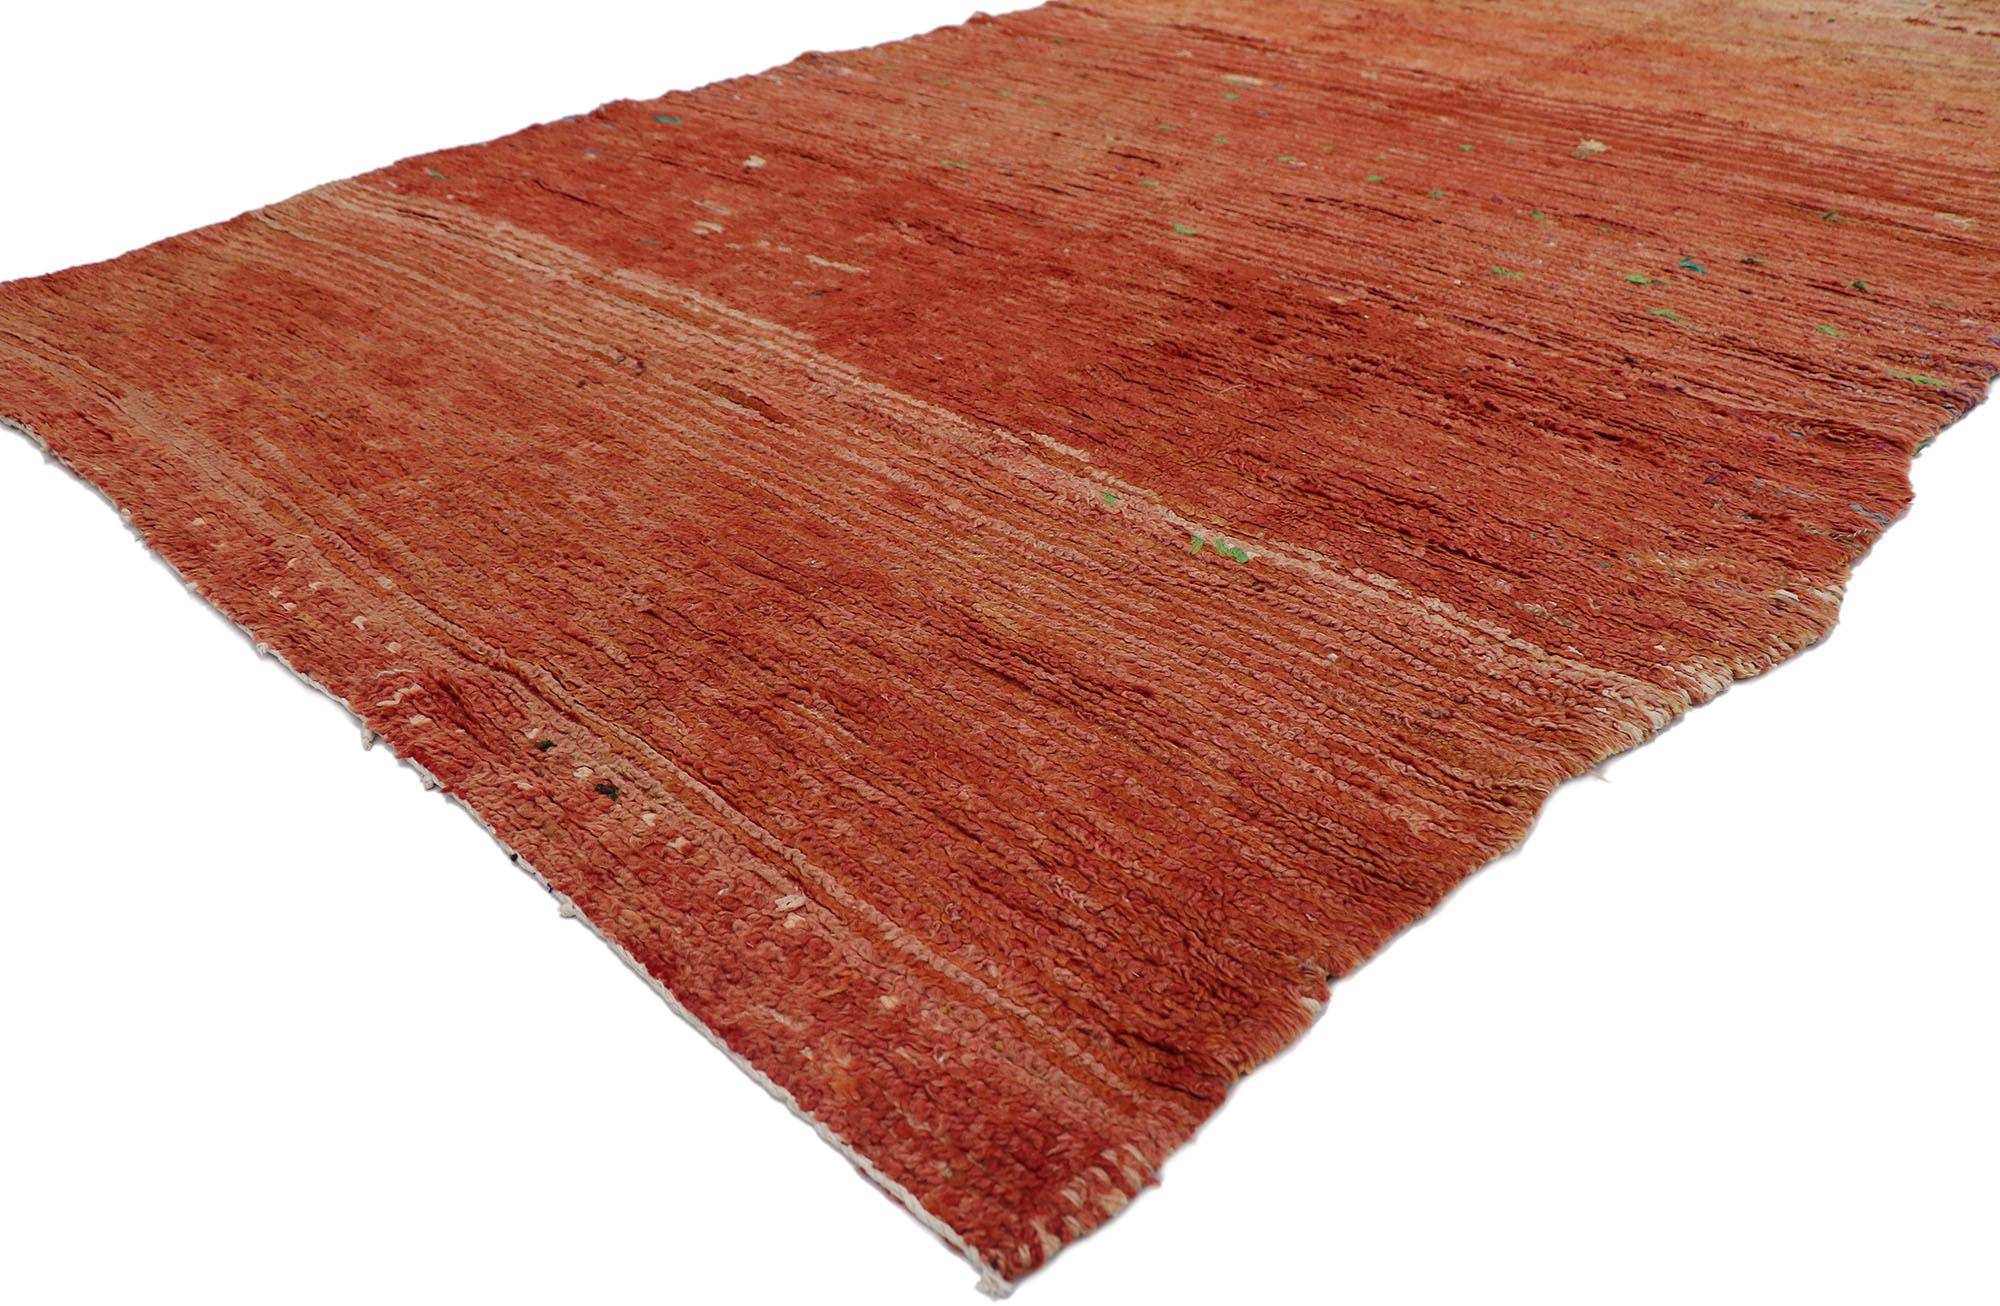 21430, vintage Berber Red Moroccan rug with Jungalow style. With its rustic sensibility, effortless beauty and simplicity, this hand knotted wool vintage Berber red Moroccan rug is a captivating vision of woven beauty. Imbued with red hues, the rich